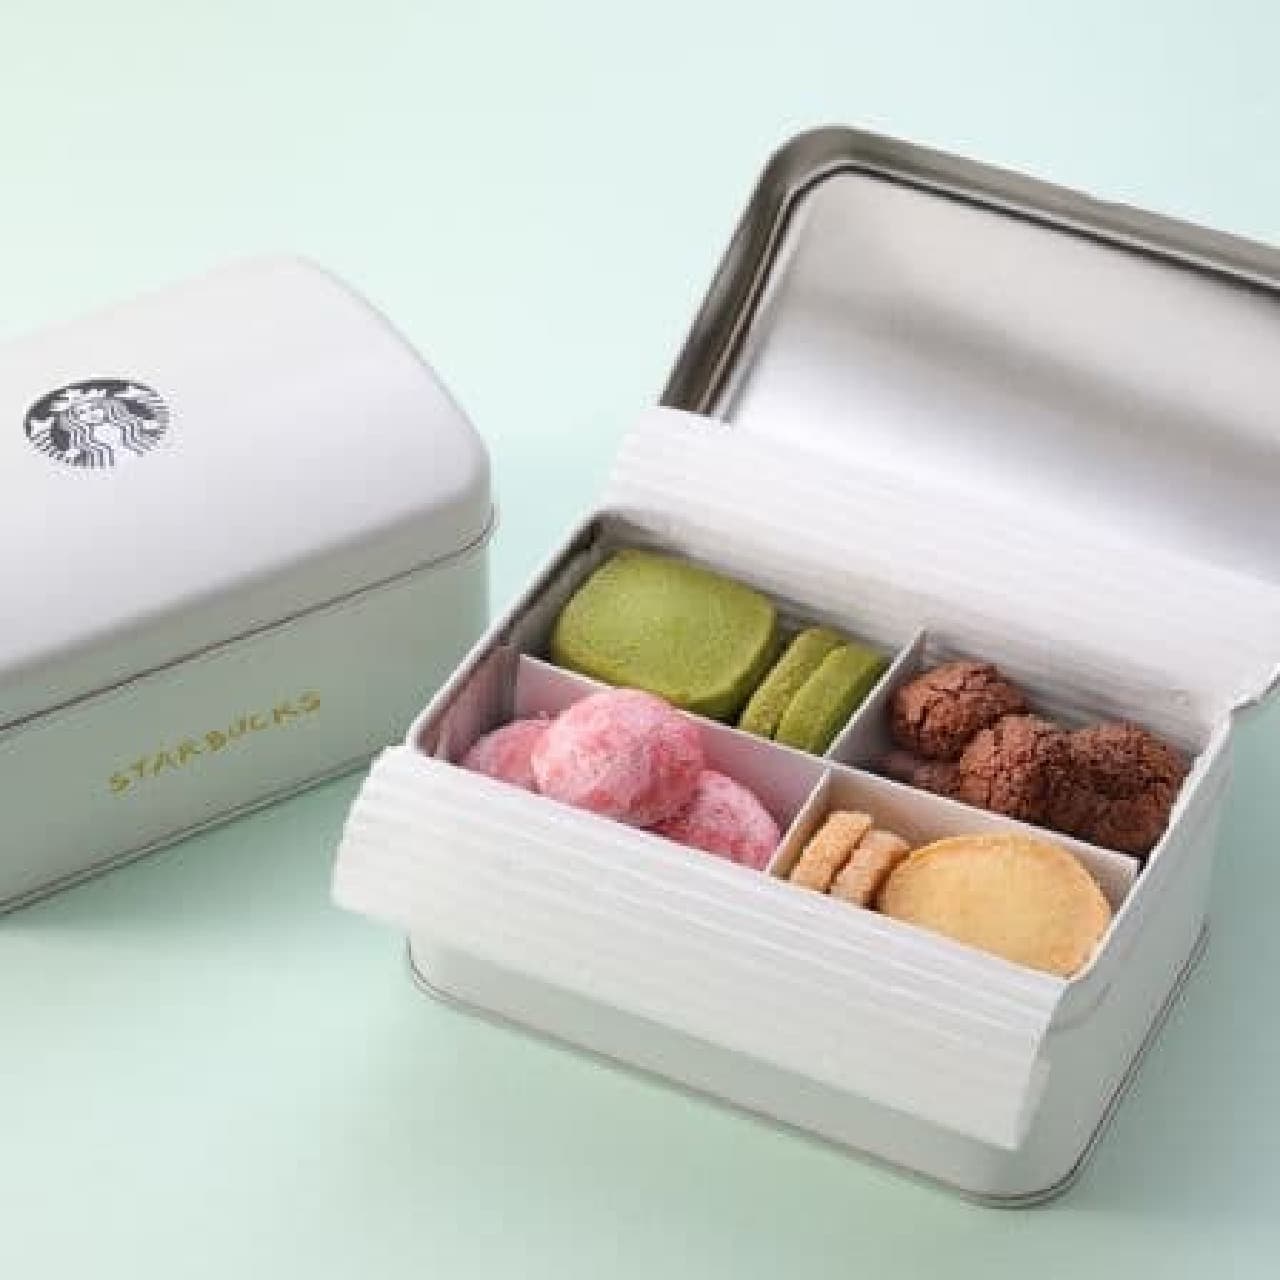 Starbucks "4 kinds of cookie assortment boxes"